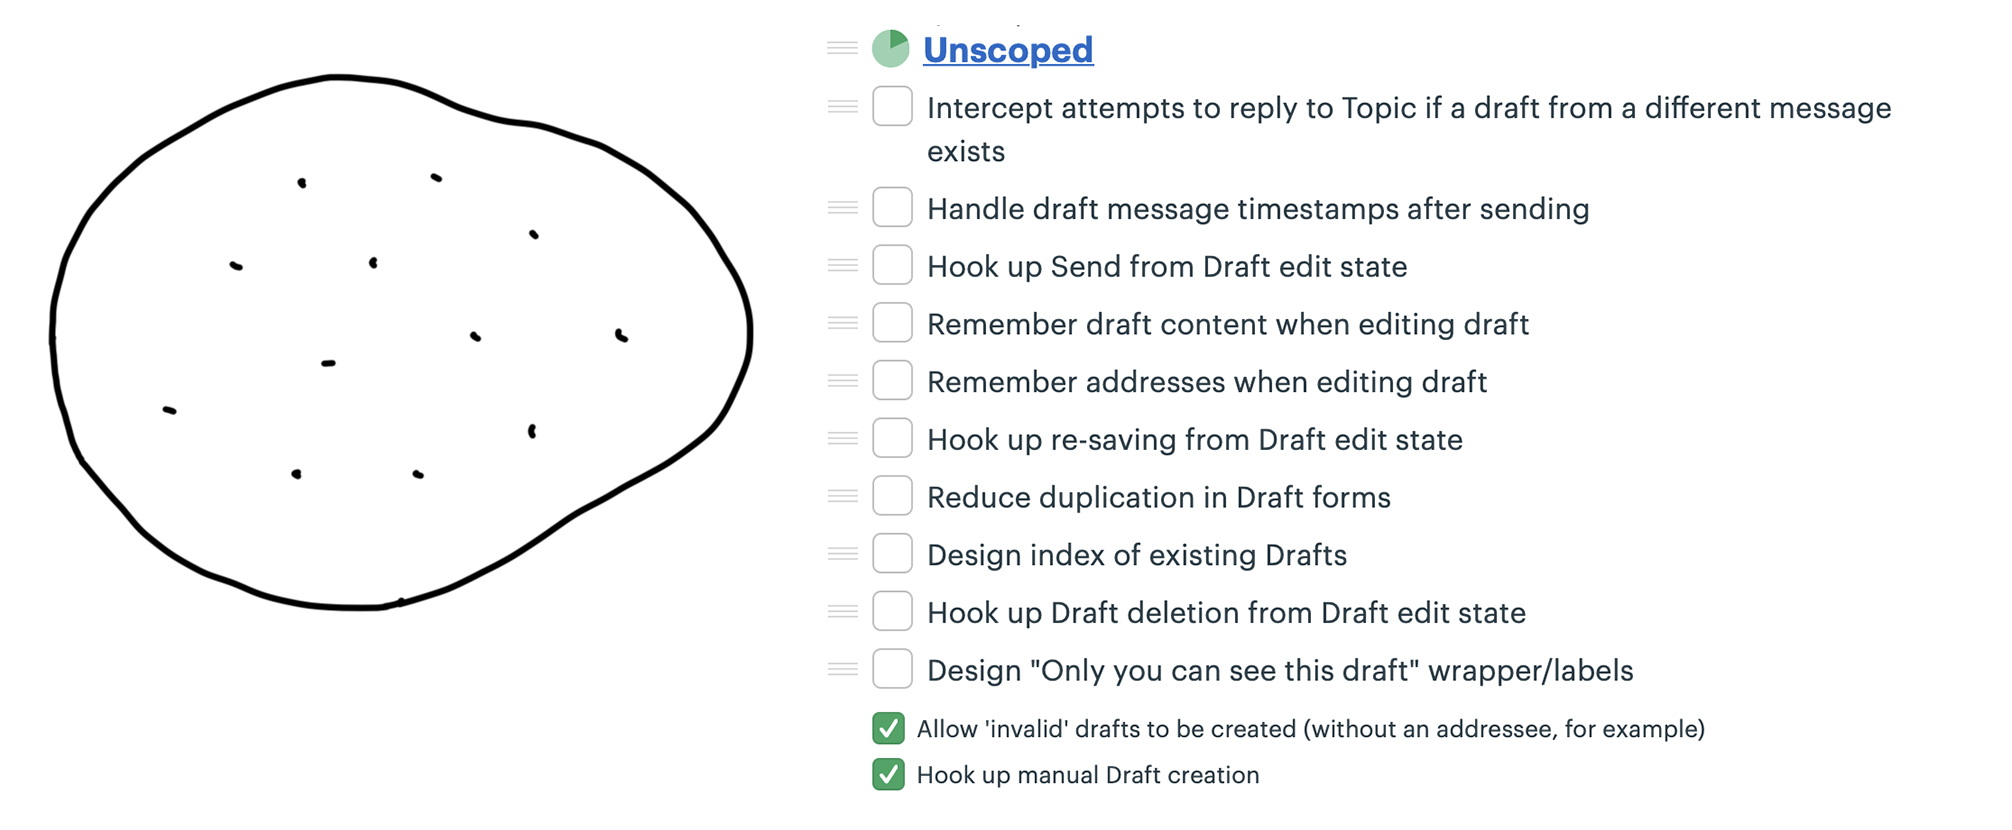 On the left, an enclosed outline that represents the project with scattered dots inside. On the right, a to-do list named 'Unscoped' with ten seemingly unrelated tasks.